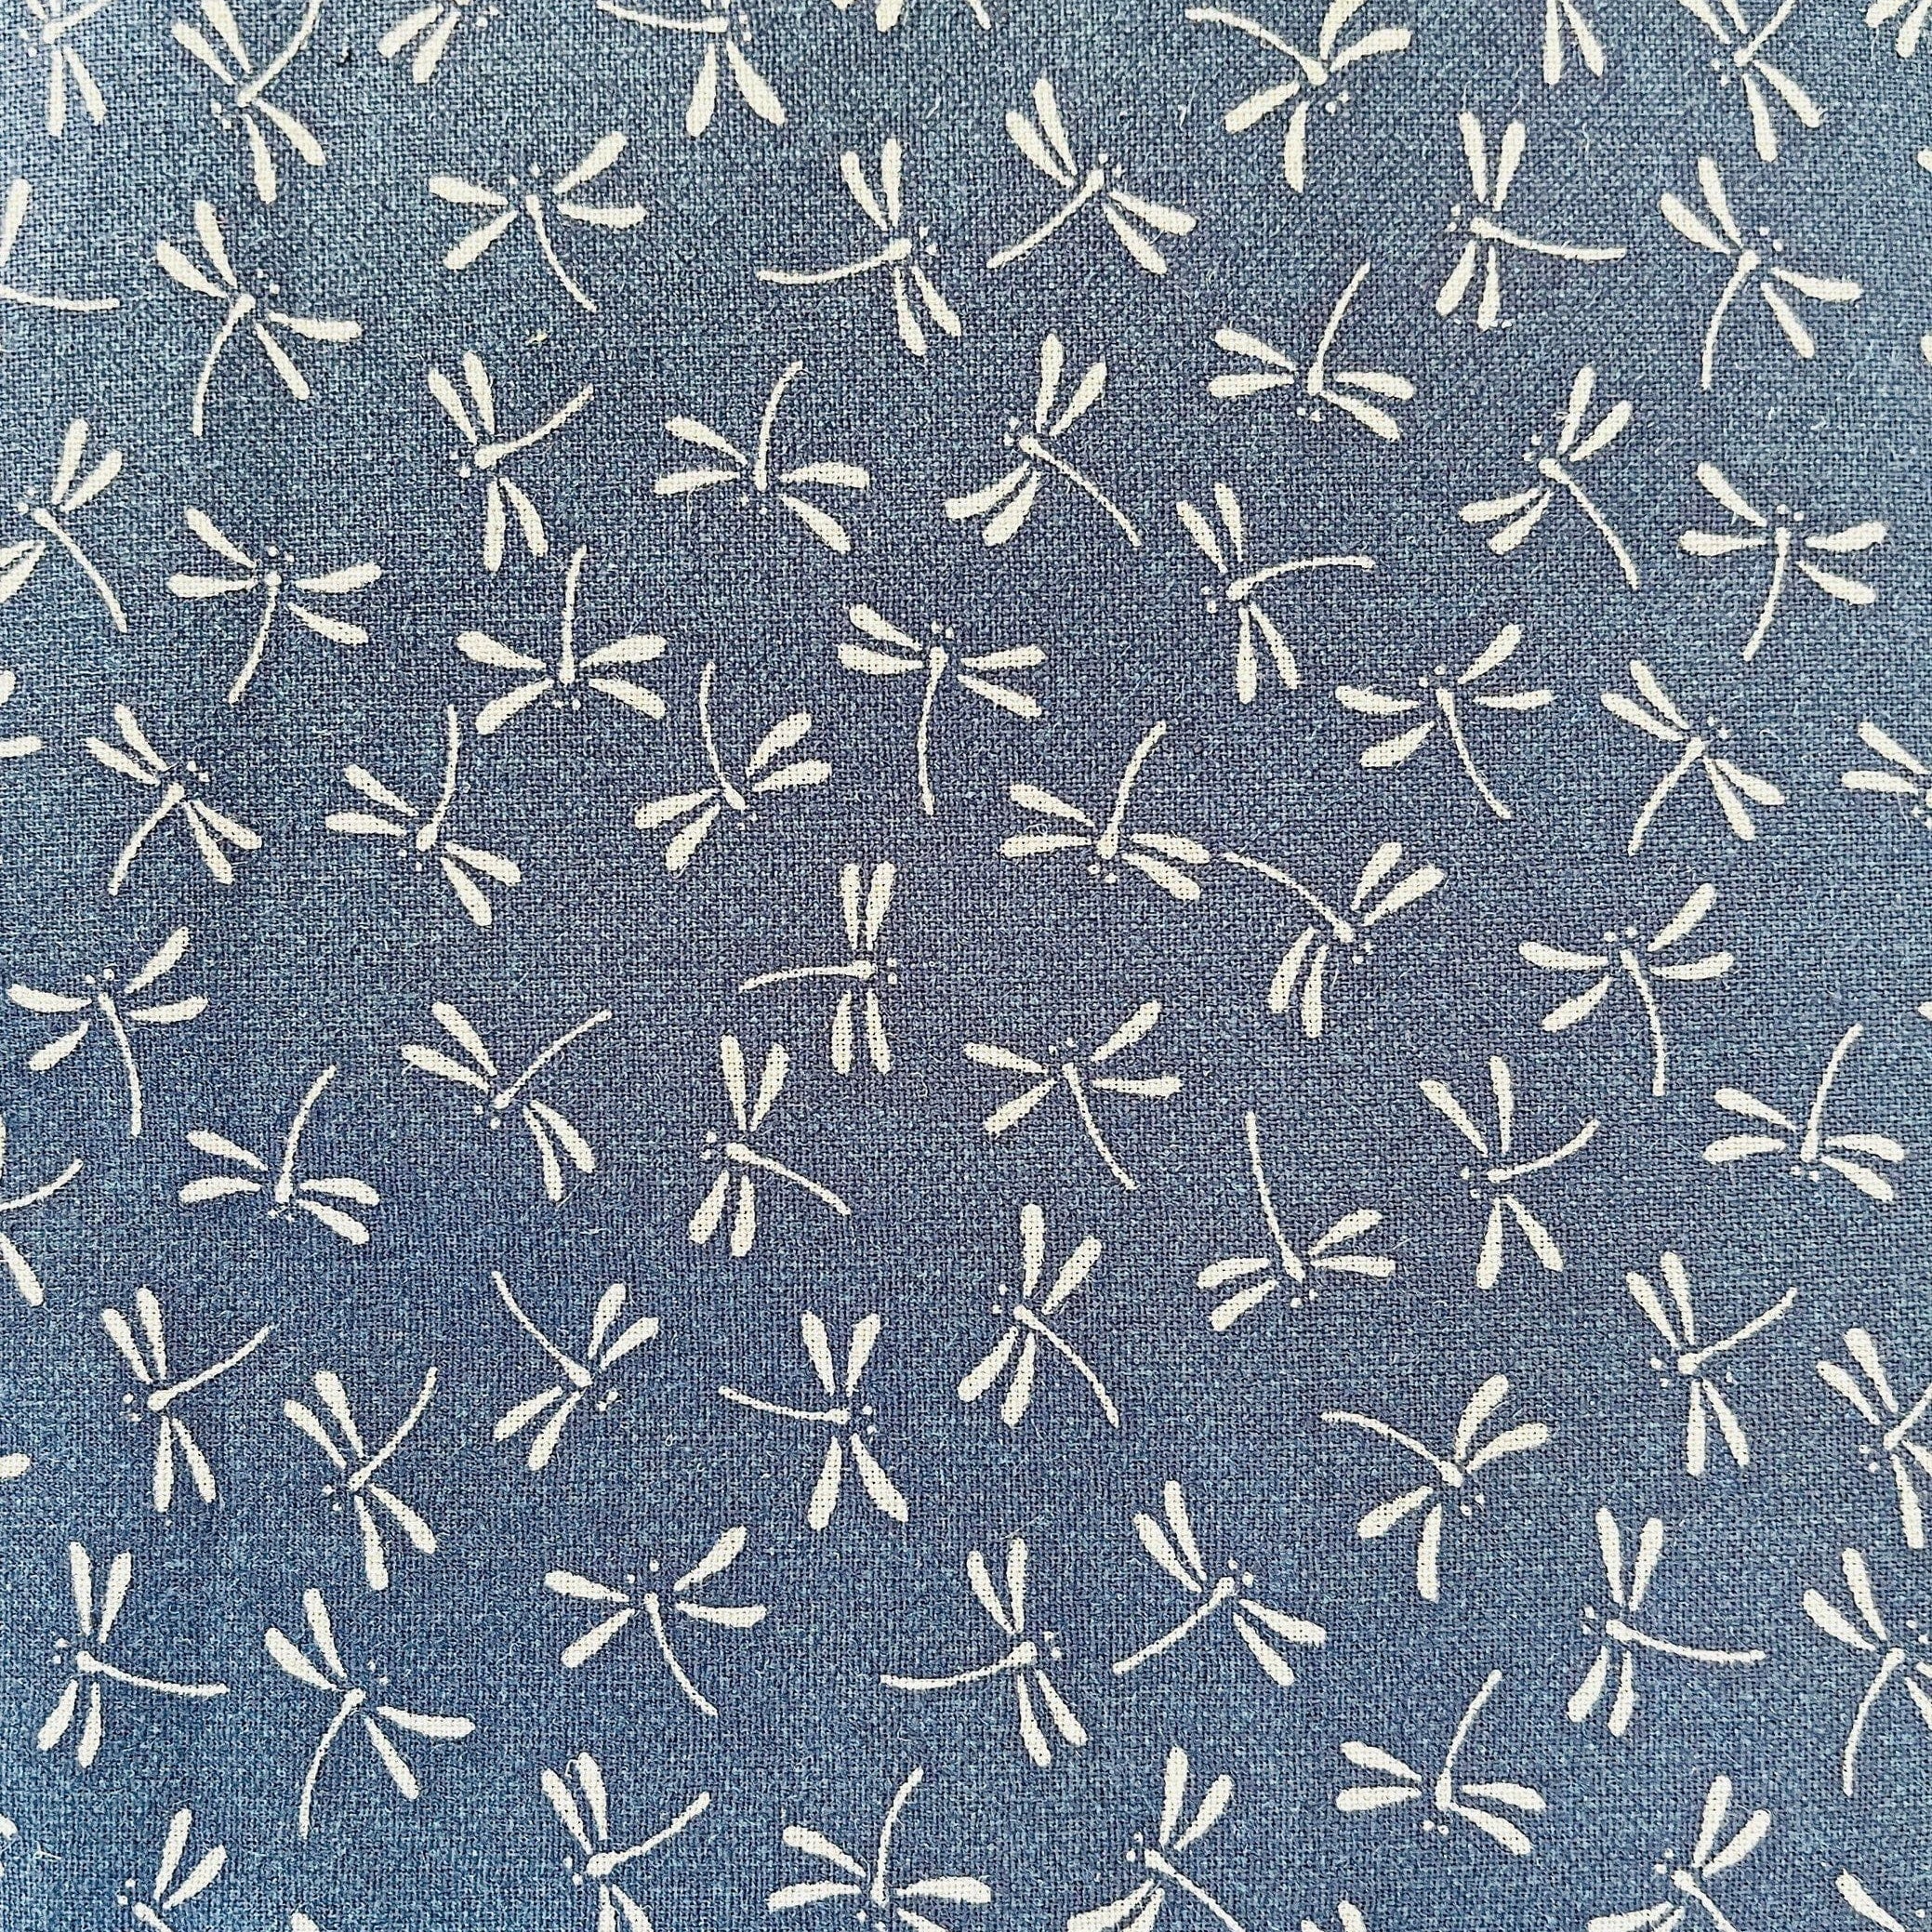 Dragonfly - Dragonfly Fabric - Westex - Sevenberry - Japanese Textile